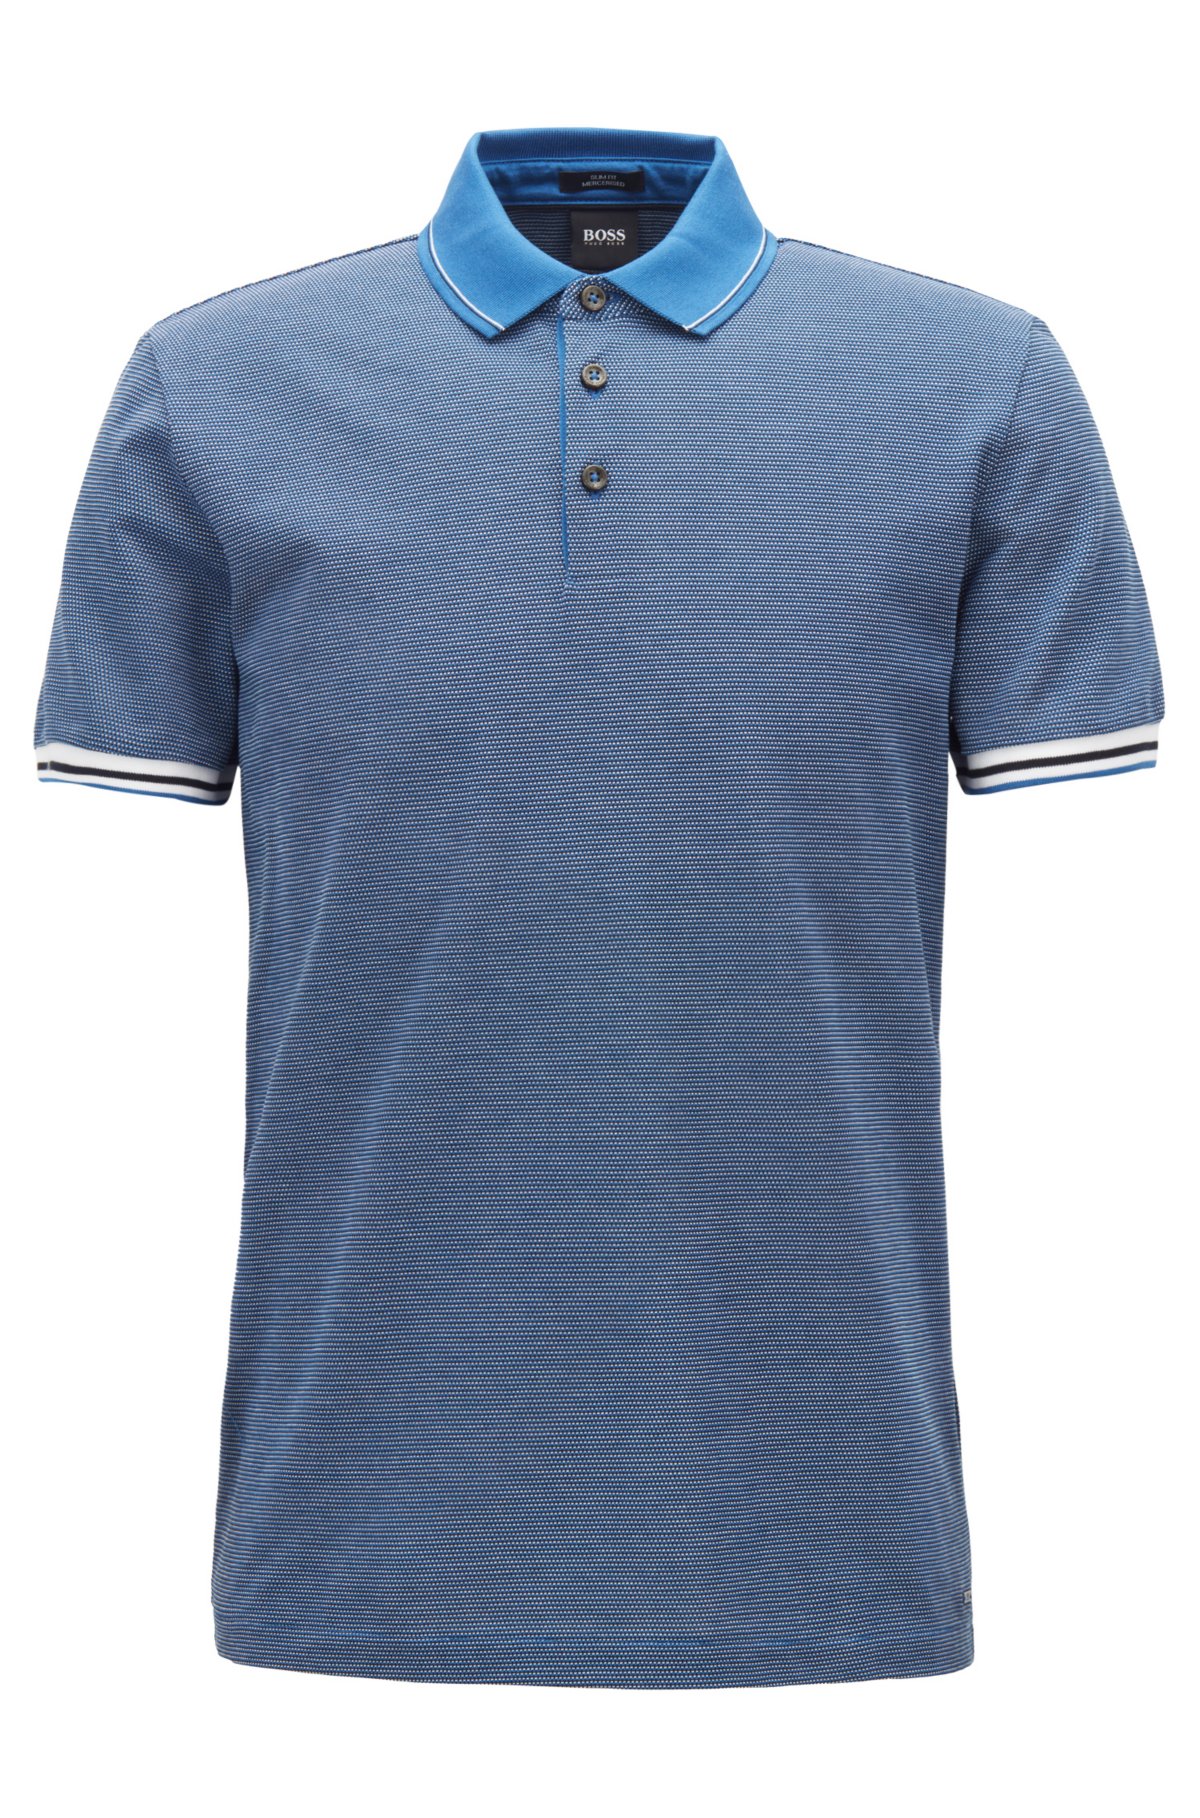 BOSS - Slim-fit polo shirt with mountaineering-inspired pattern